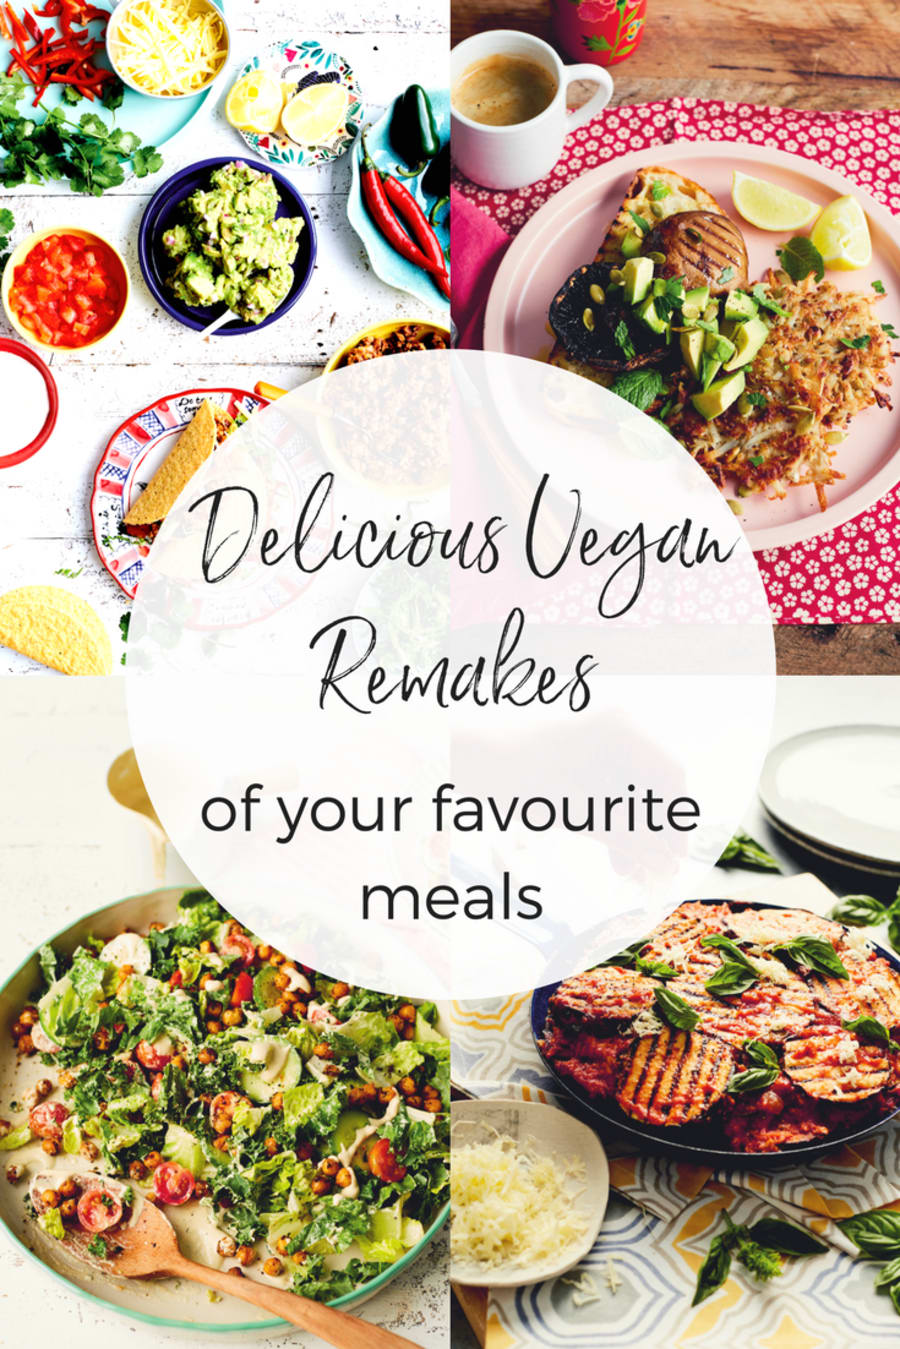 Love Tacos, Eggplant Parma And Caesar Salad? Try These Vegan Remakes